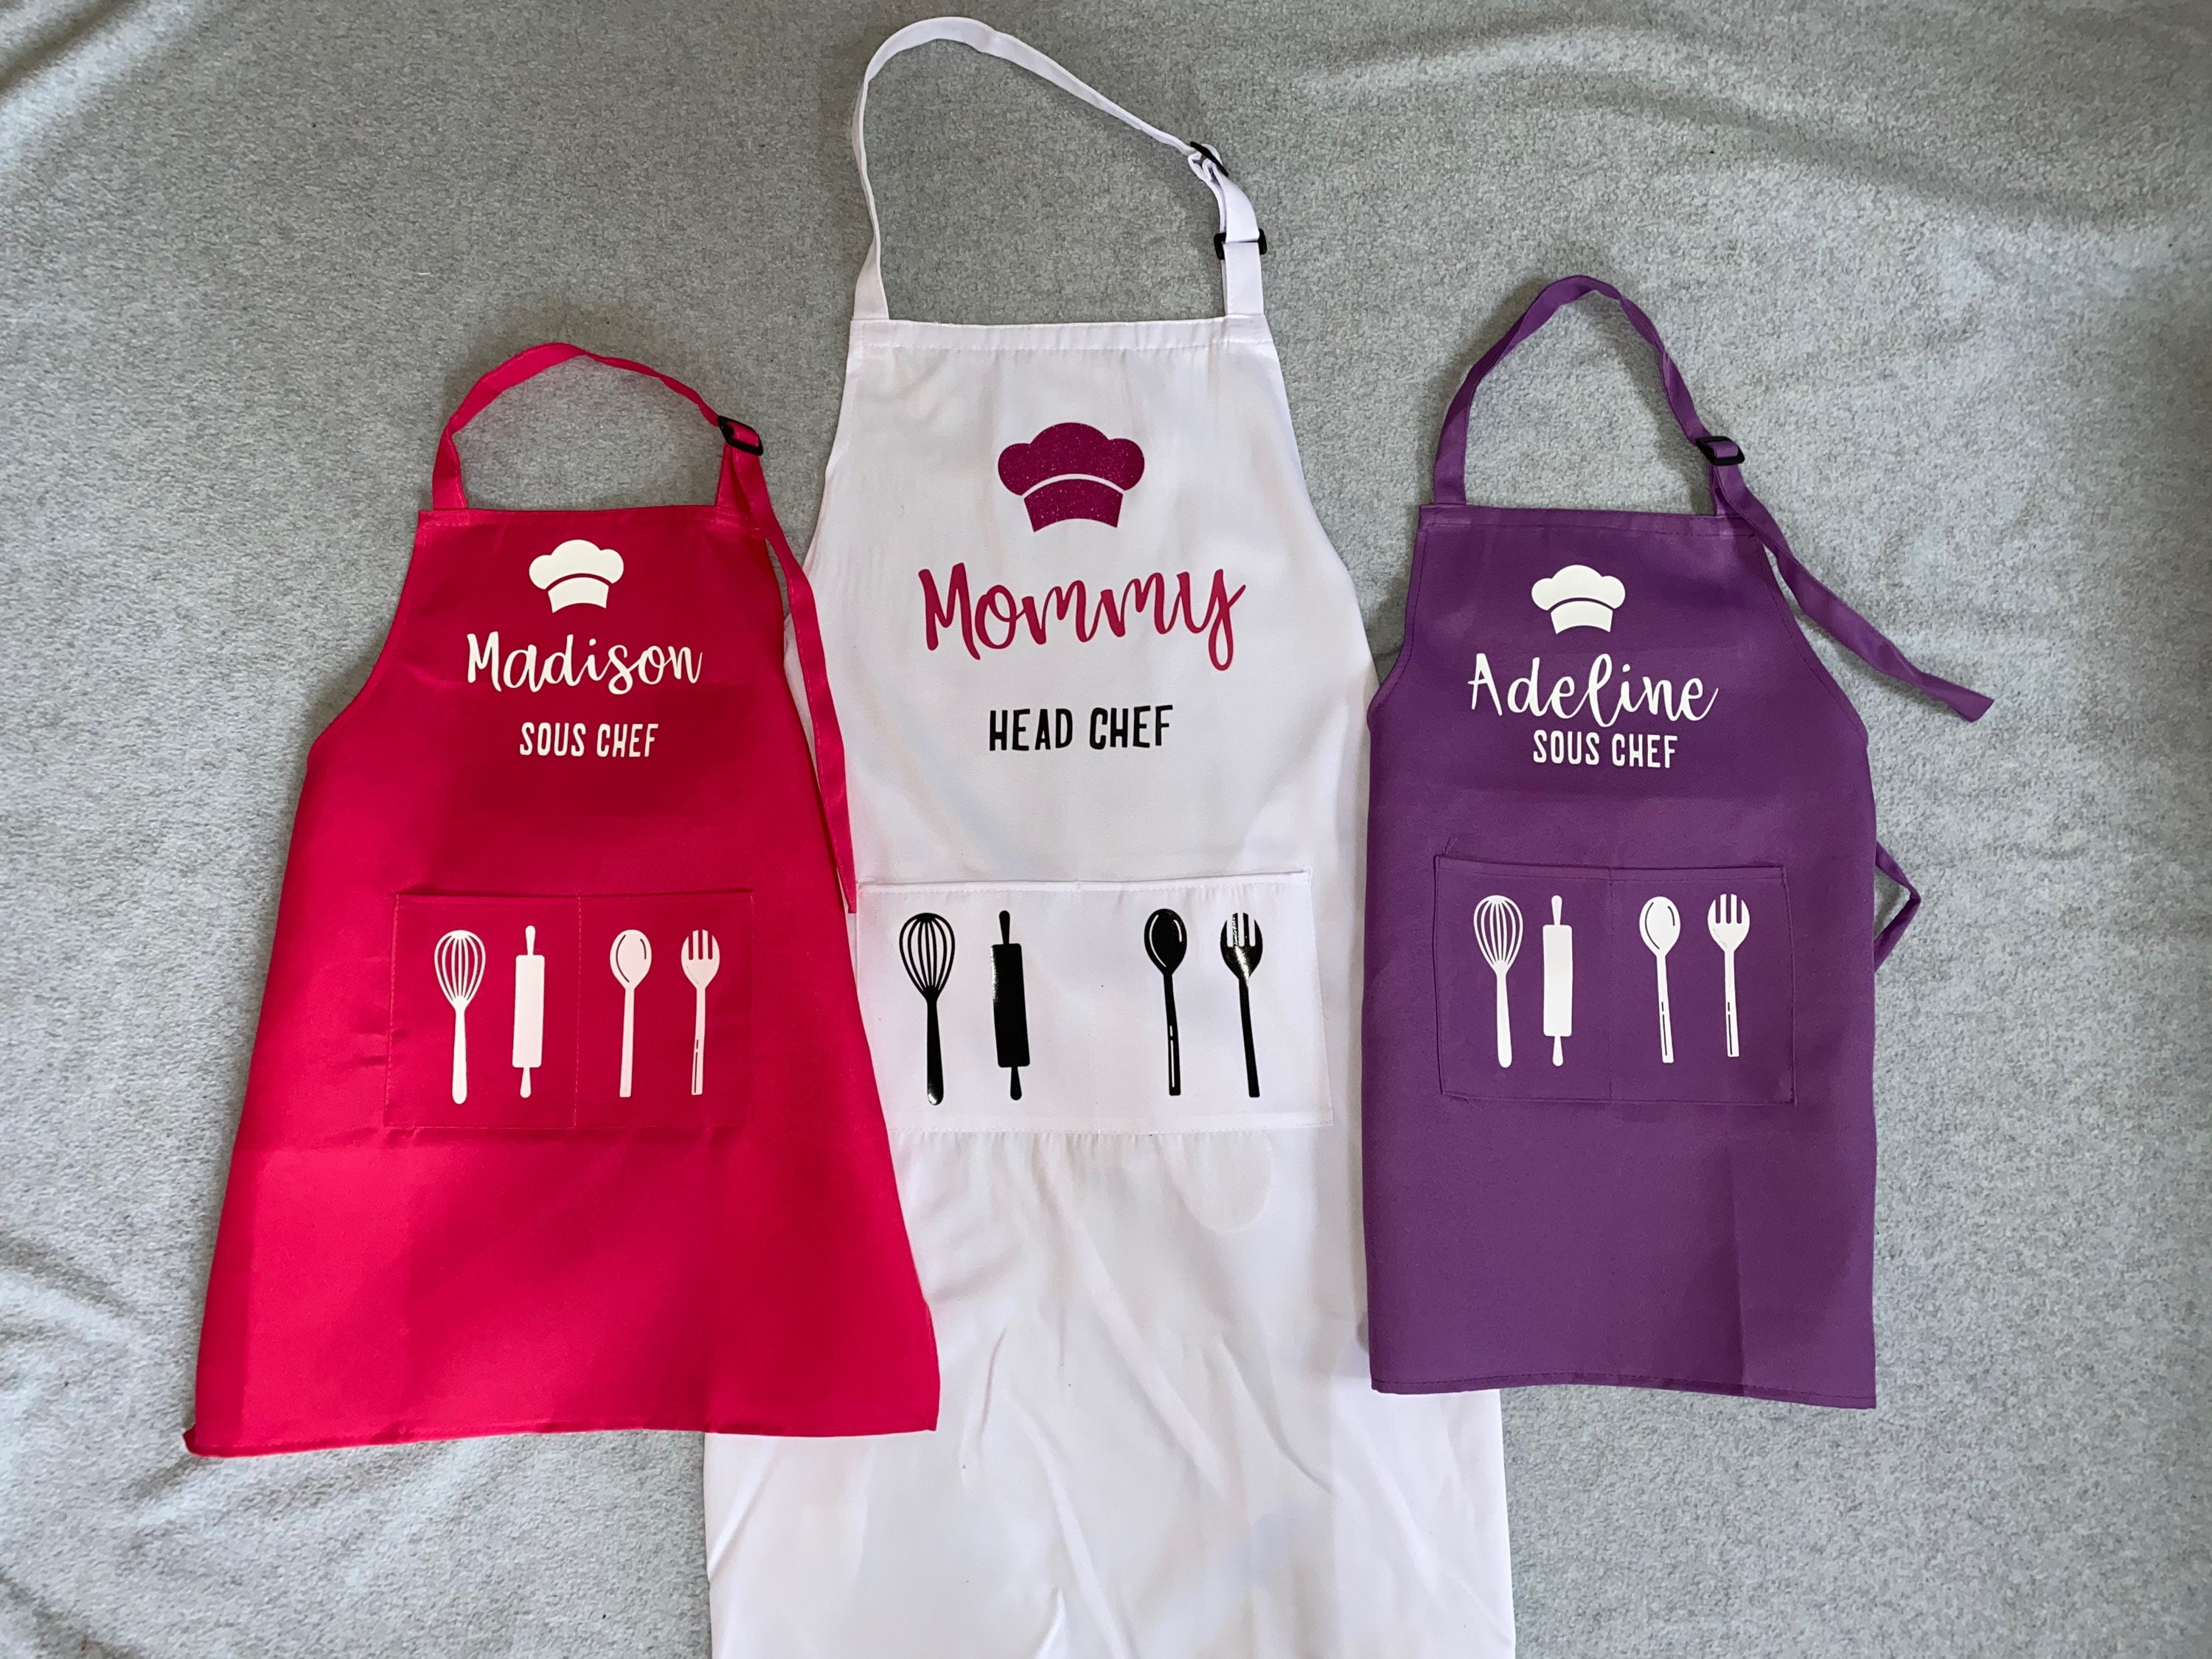 Best Mom Ever Apron for Women, Kitchen Aprons for women with pockets,  Mothers Day Gifts for Mom from Daughter, Son, Husband, Friends, Grandma,  Unique Adjustable…